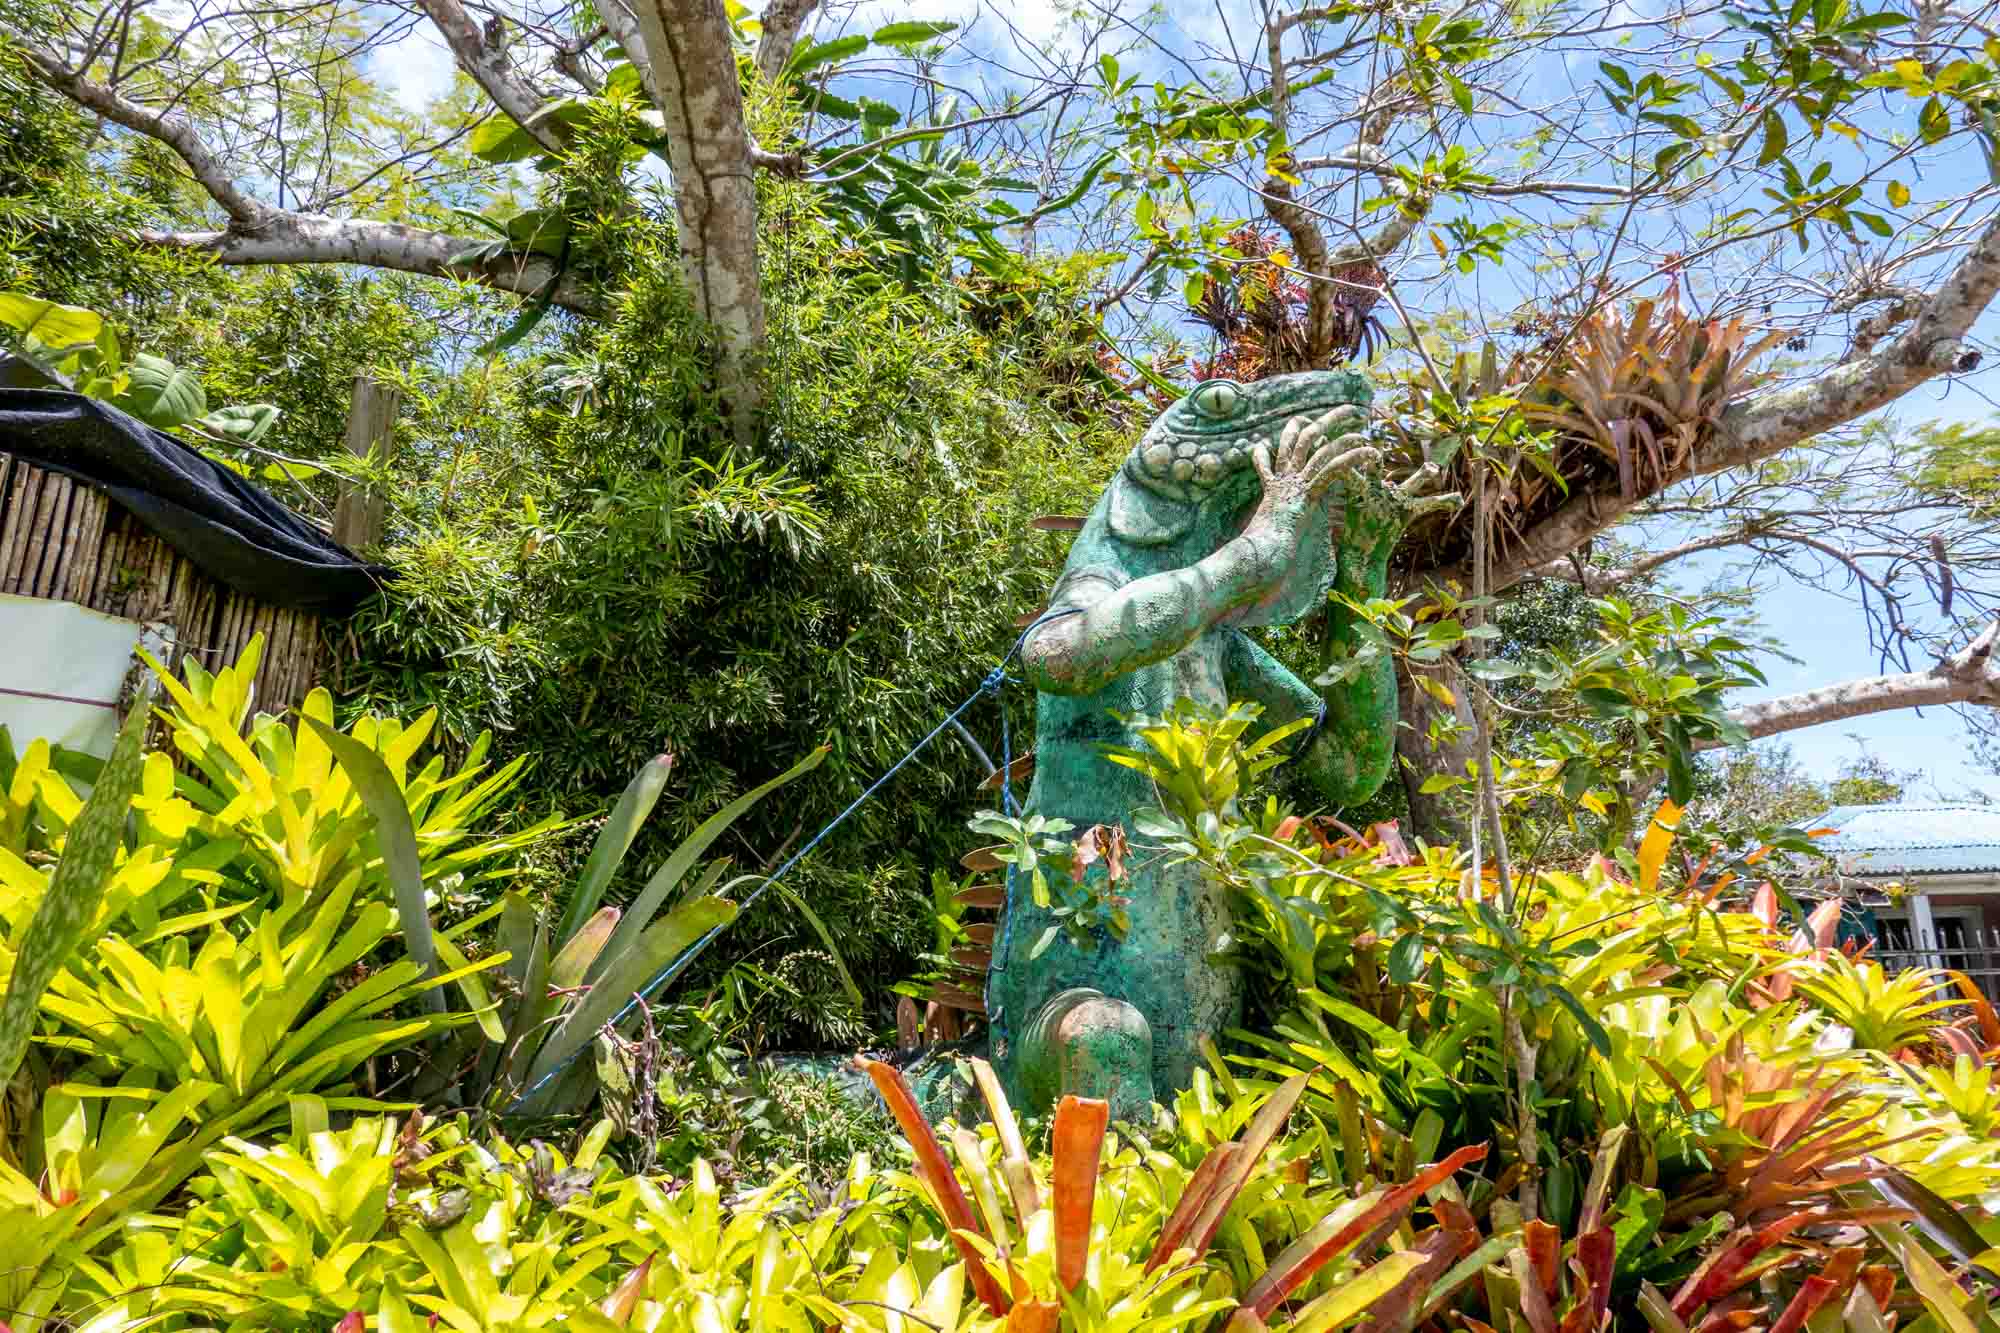 Lizard stature surrounded by plants and trees